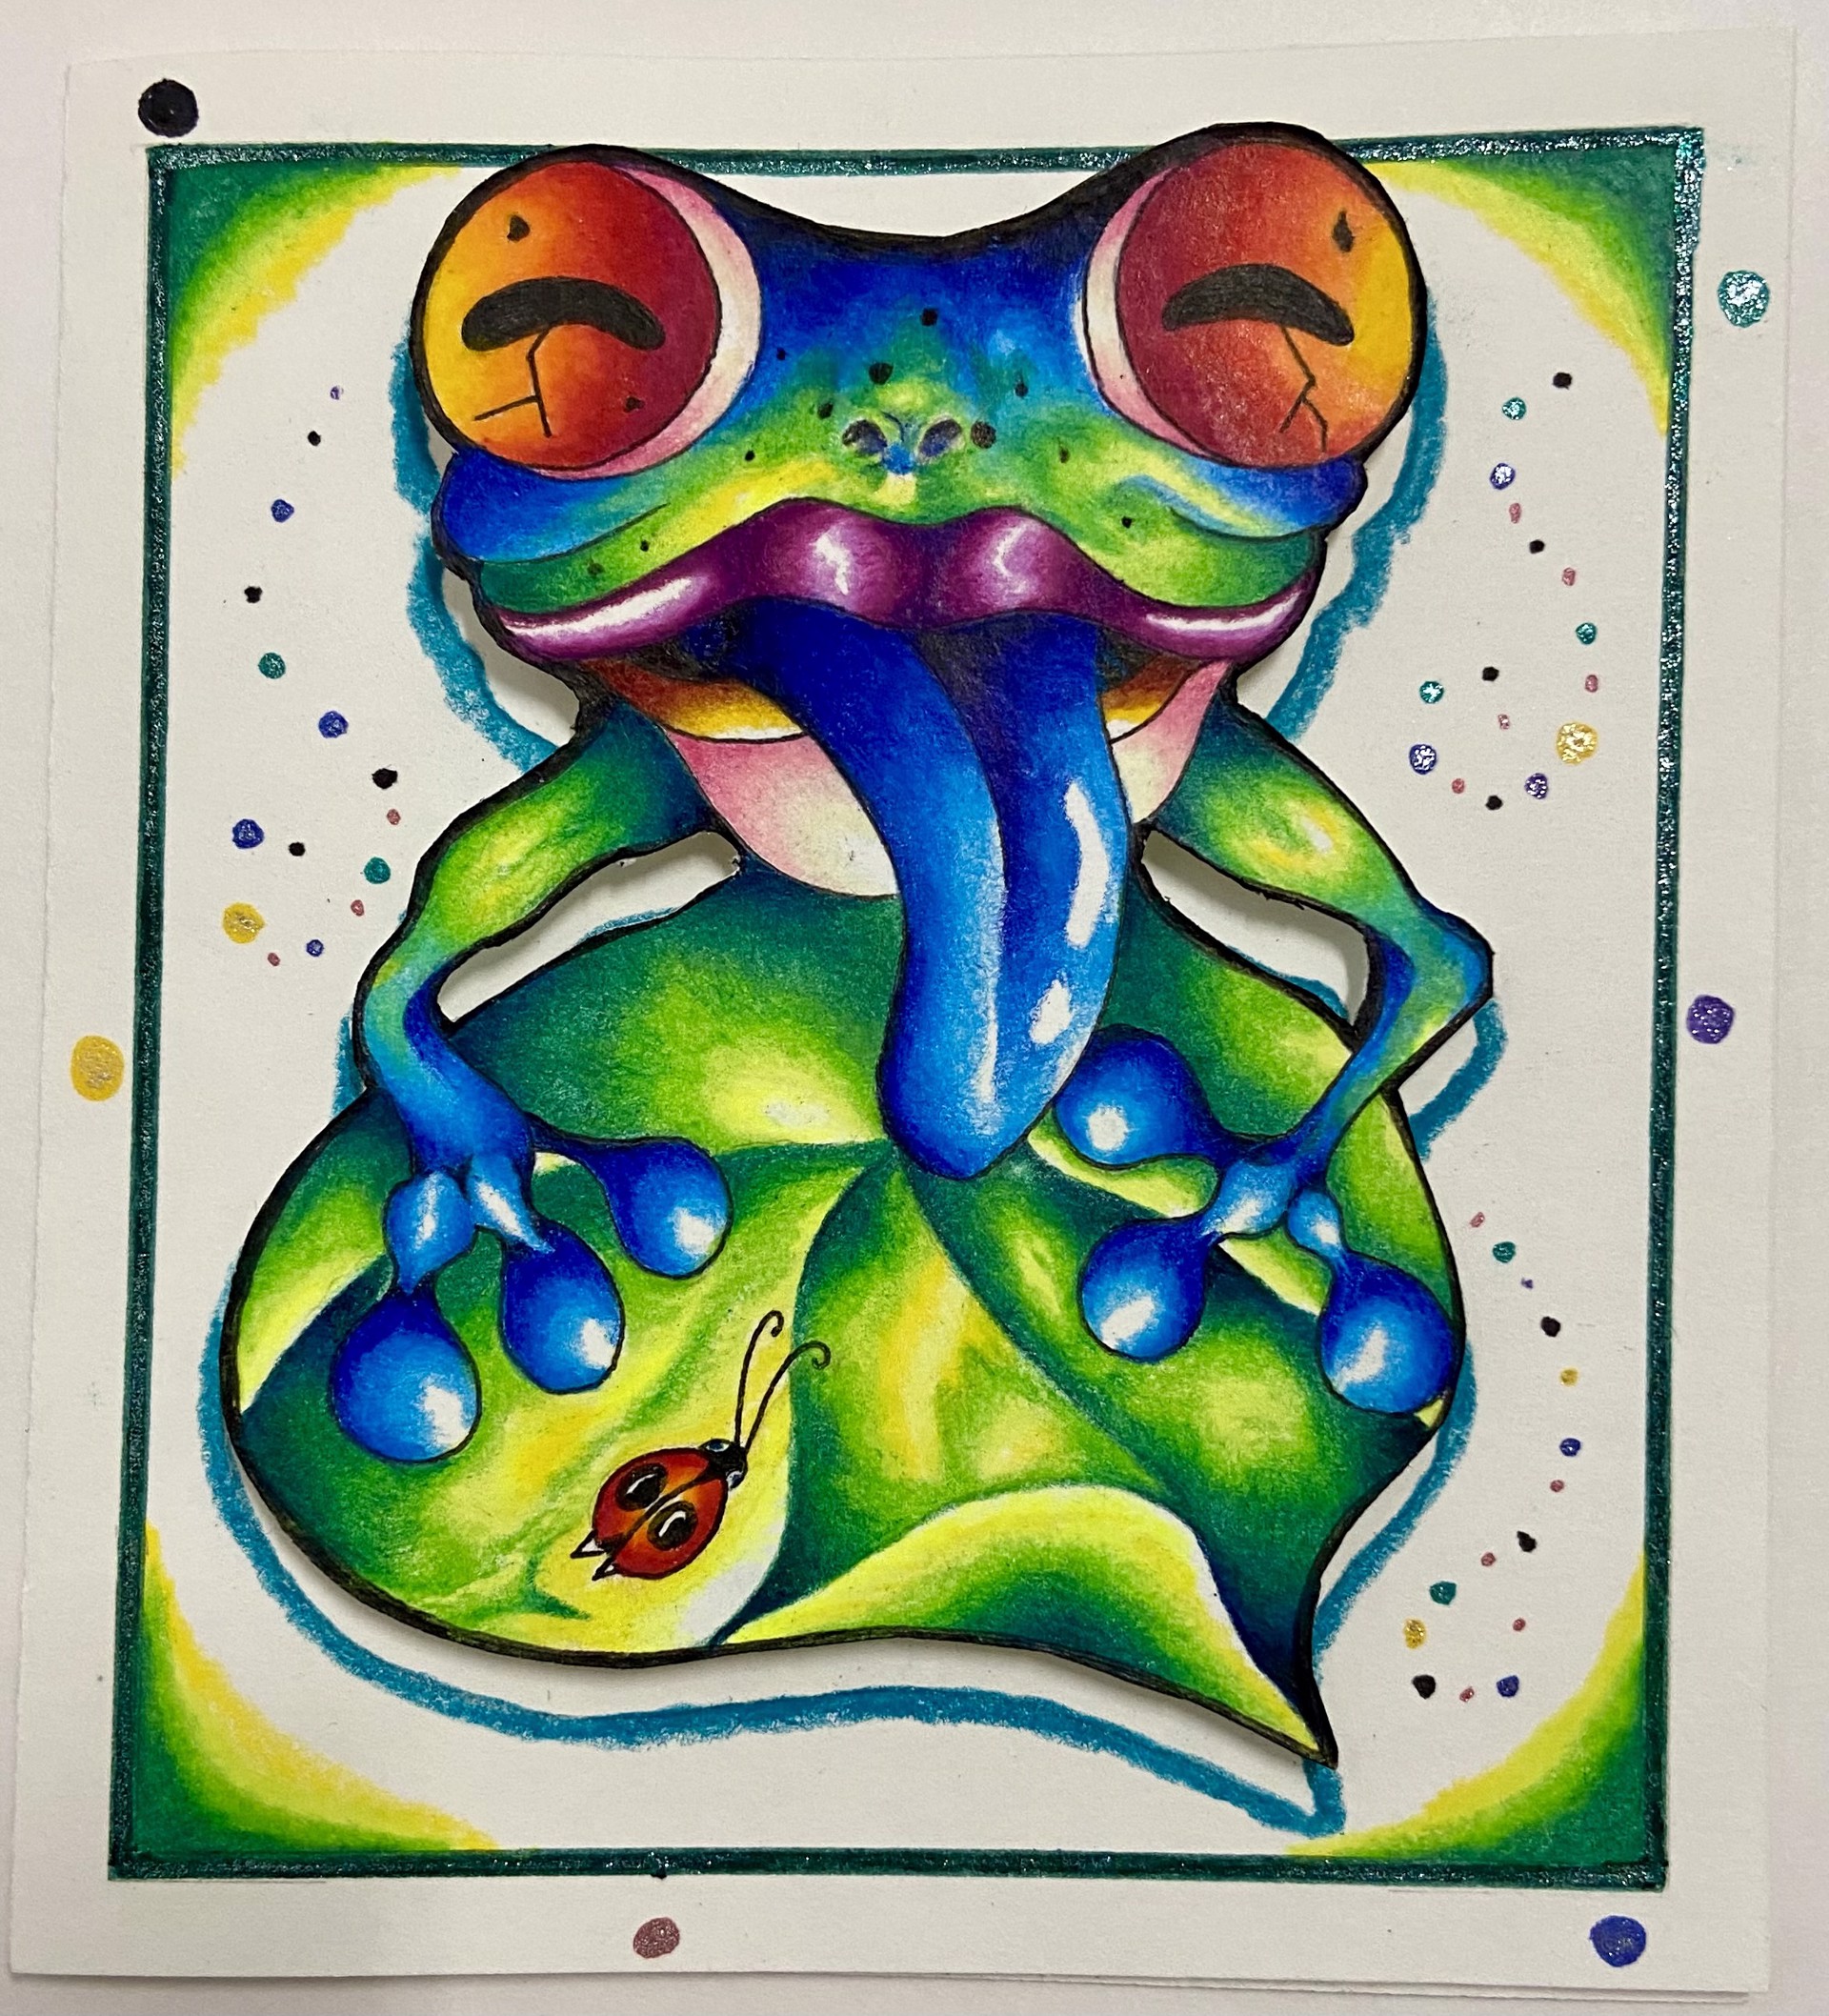 Small Frog Card by Tom McGrath